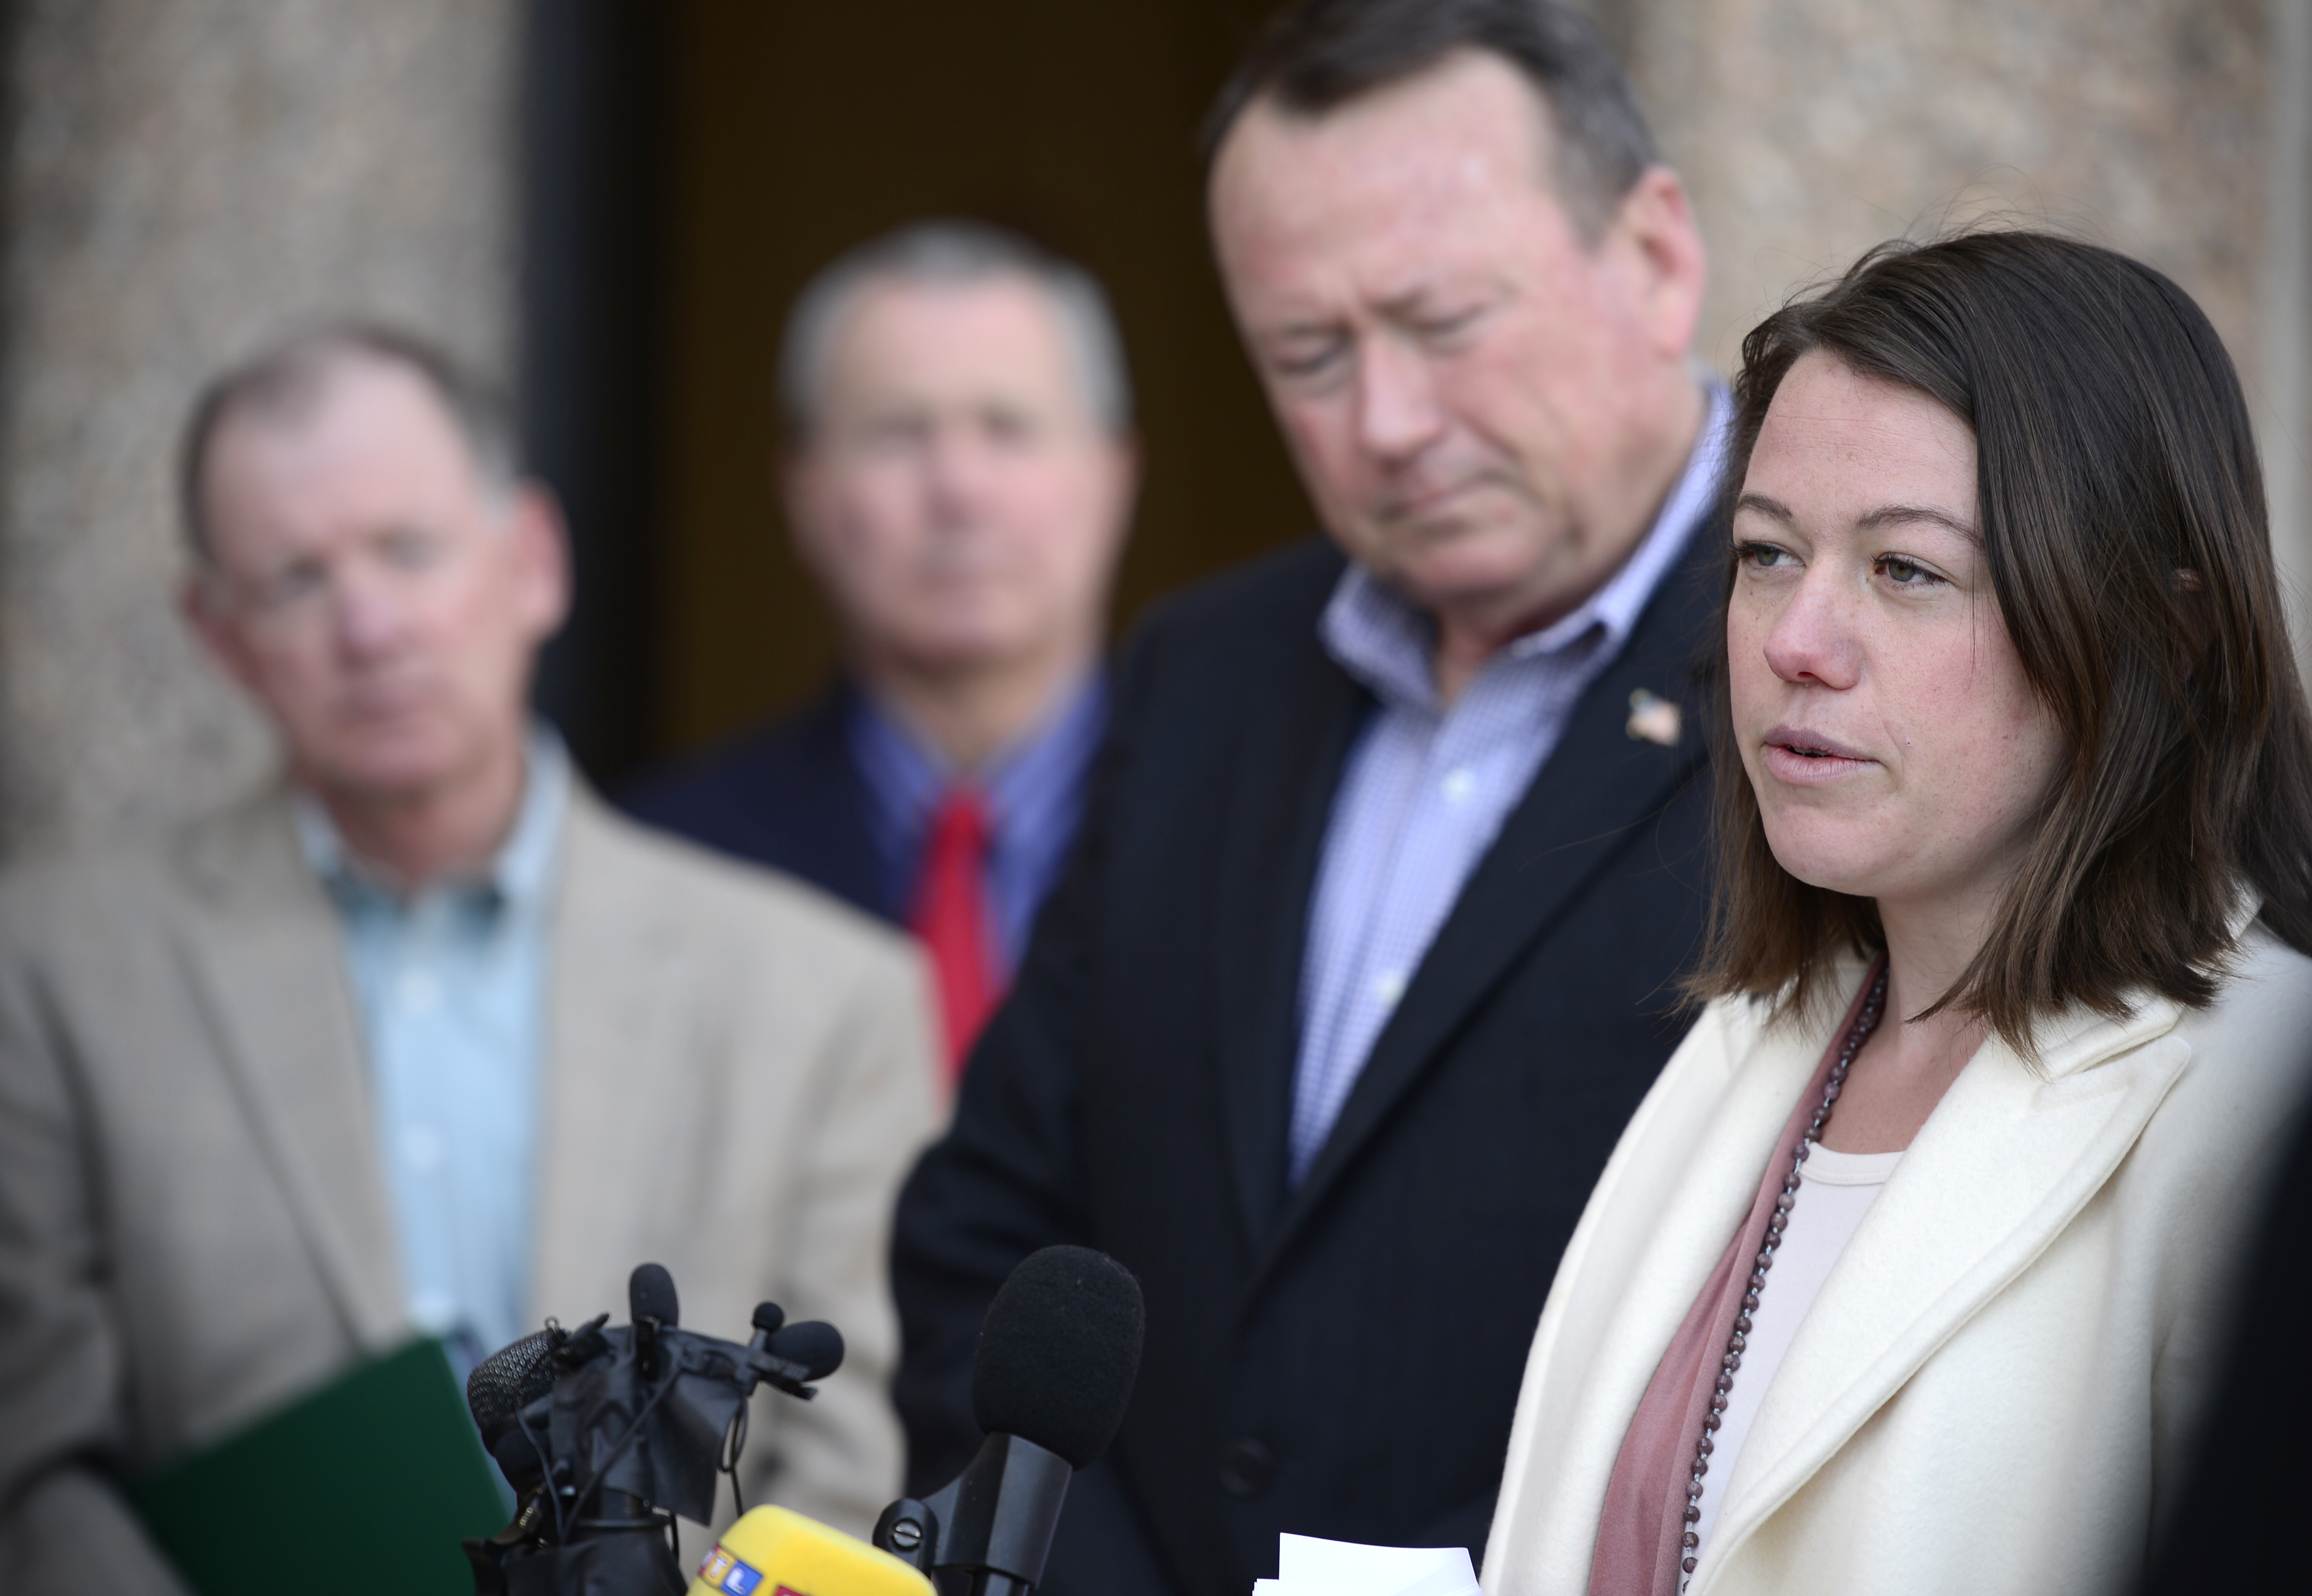 Michelle Wilkins speaks to the media after Dynel Lane was found guilty of attempted first-degree murder, assault and unlawful termination of a pregnancy in Boulder, Colo. on Feb. 23, 2016. (Matthew Jonas—AP)